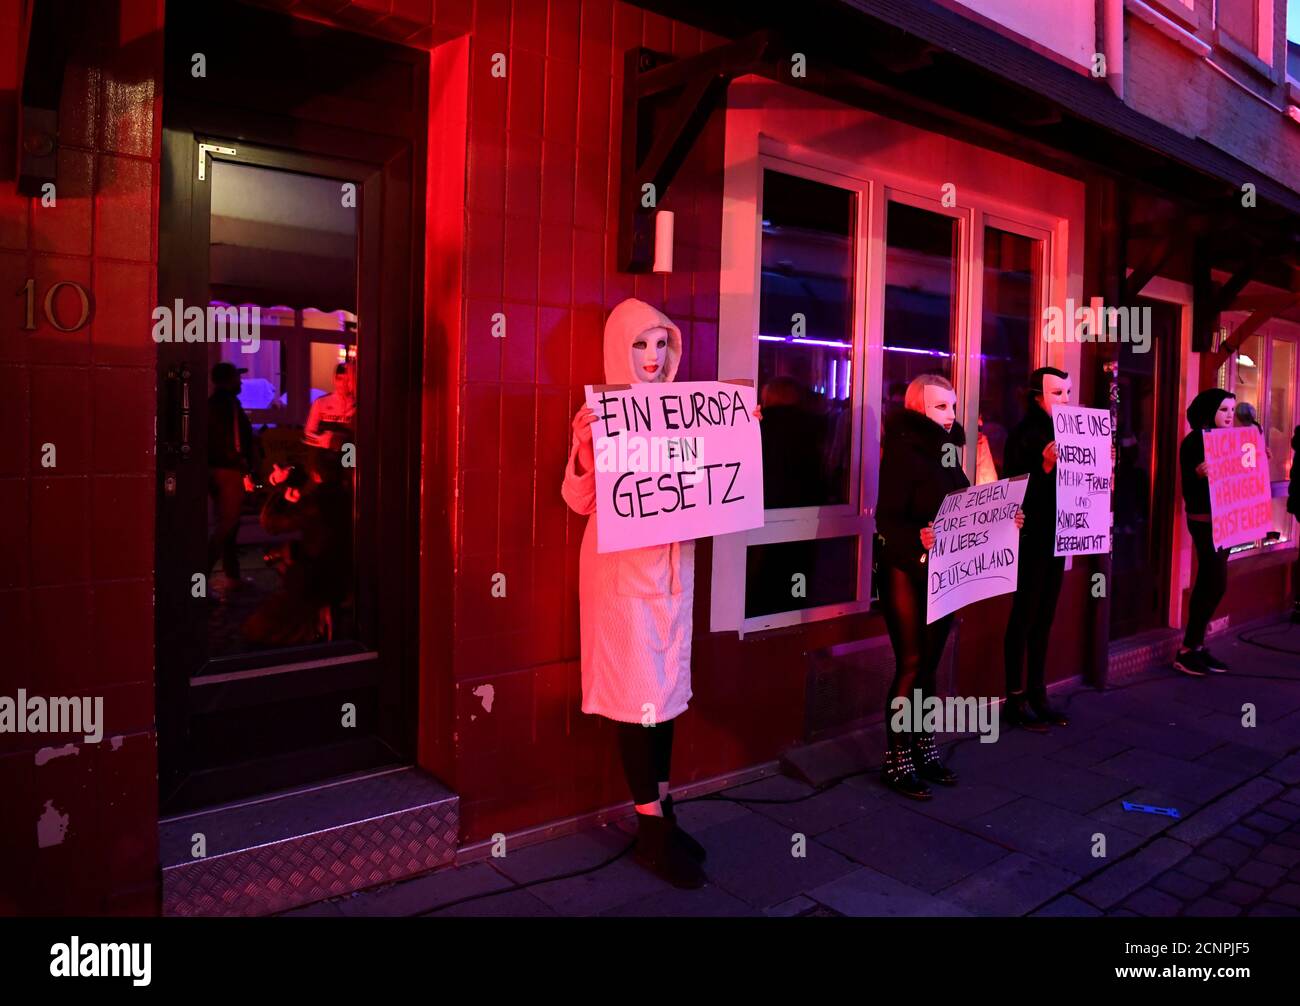 Prostitutes wearing masks hold reading "One Europe - One Law", "We attract your tourists, dear Germany" and "Without us more women and children will be violated", during a rally of prostitutes